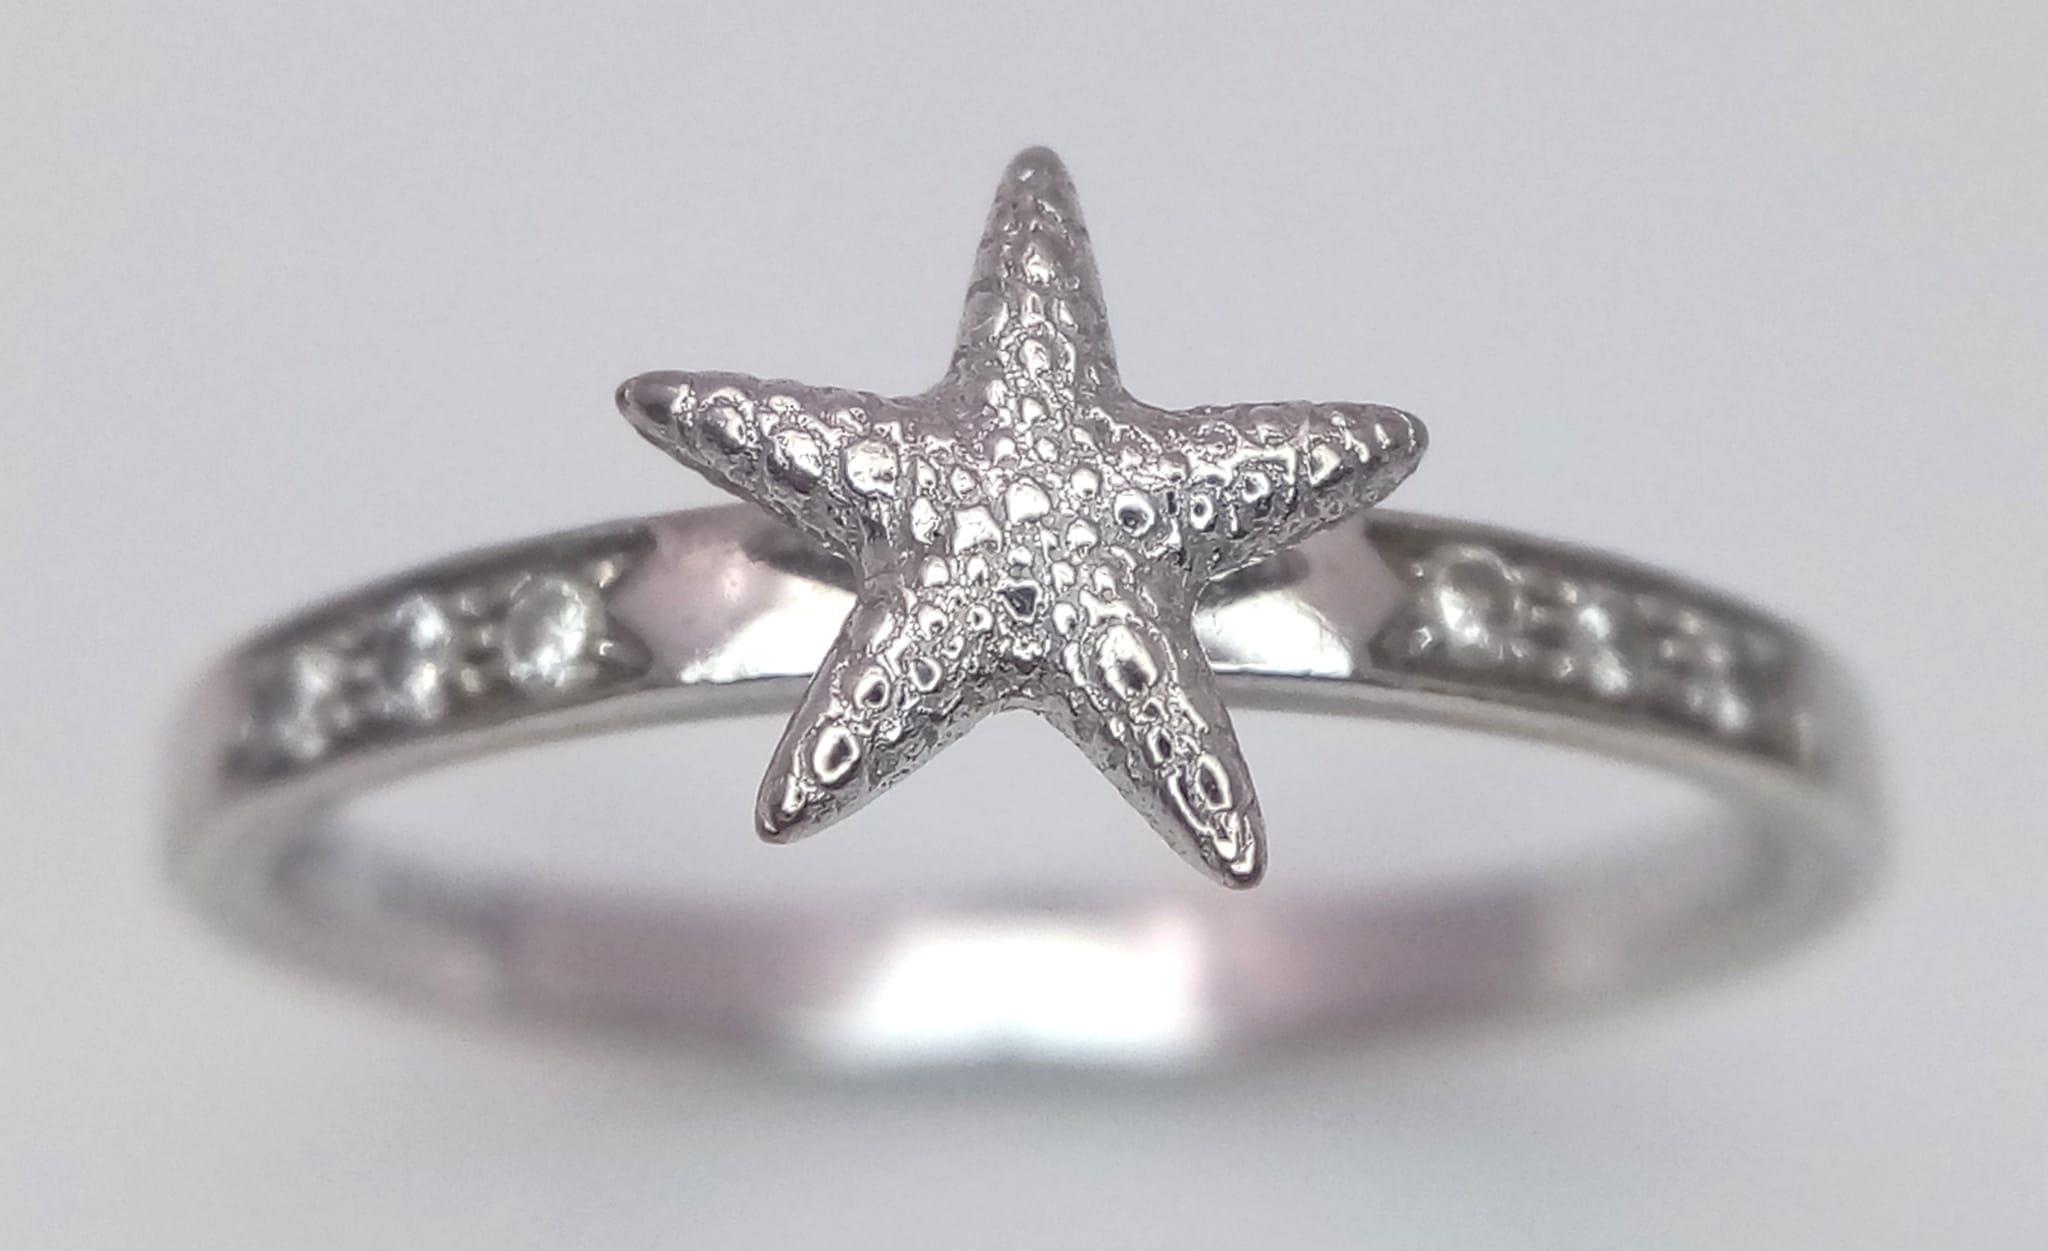 An 18K White Gold Theo Fennell Starfish Diamond Set Ring. Size N, 4.8g total weight. Ref: SC 7064 - Image 2 of 4